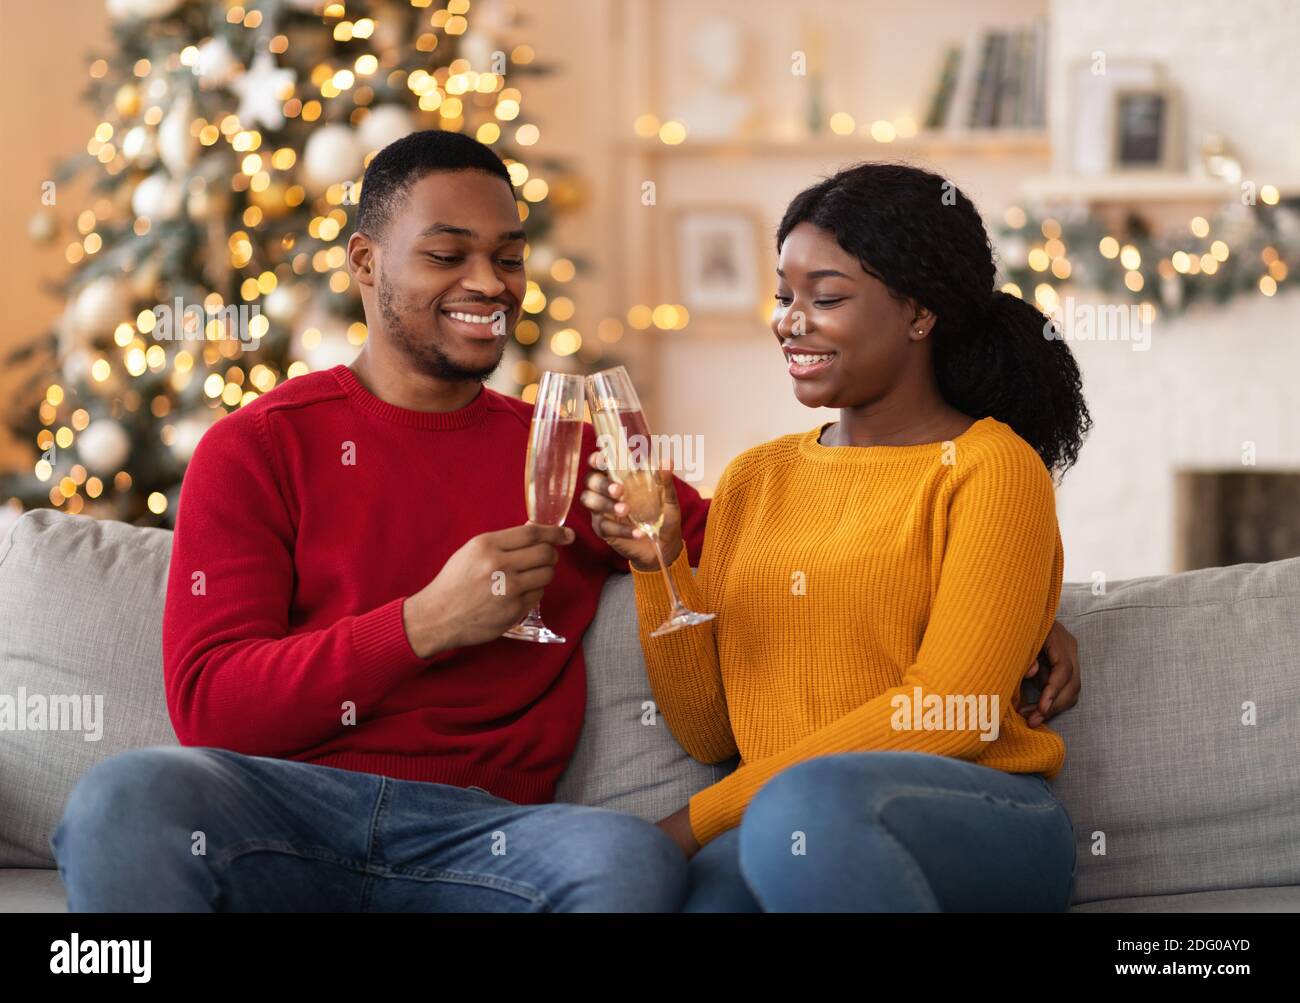 Millennial cheerful african american guy and woman clink glasses of champagne Stock Photo